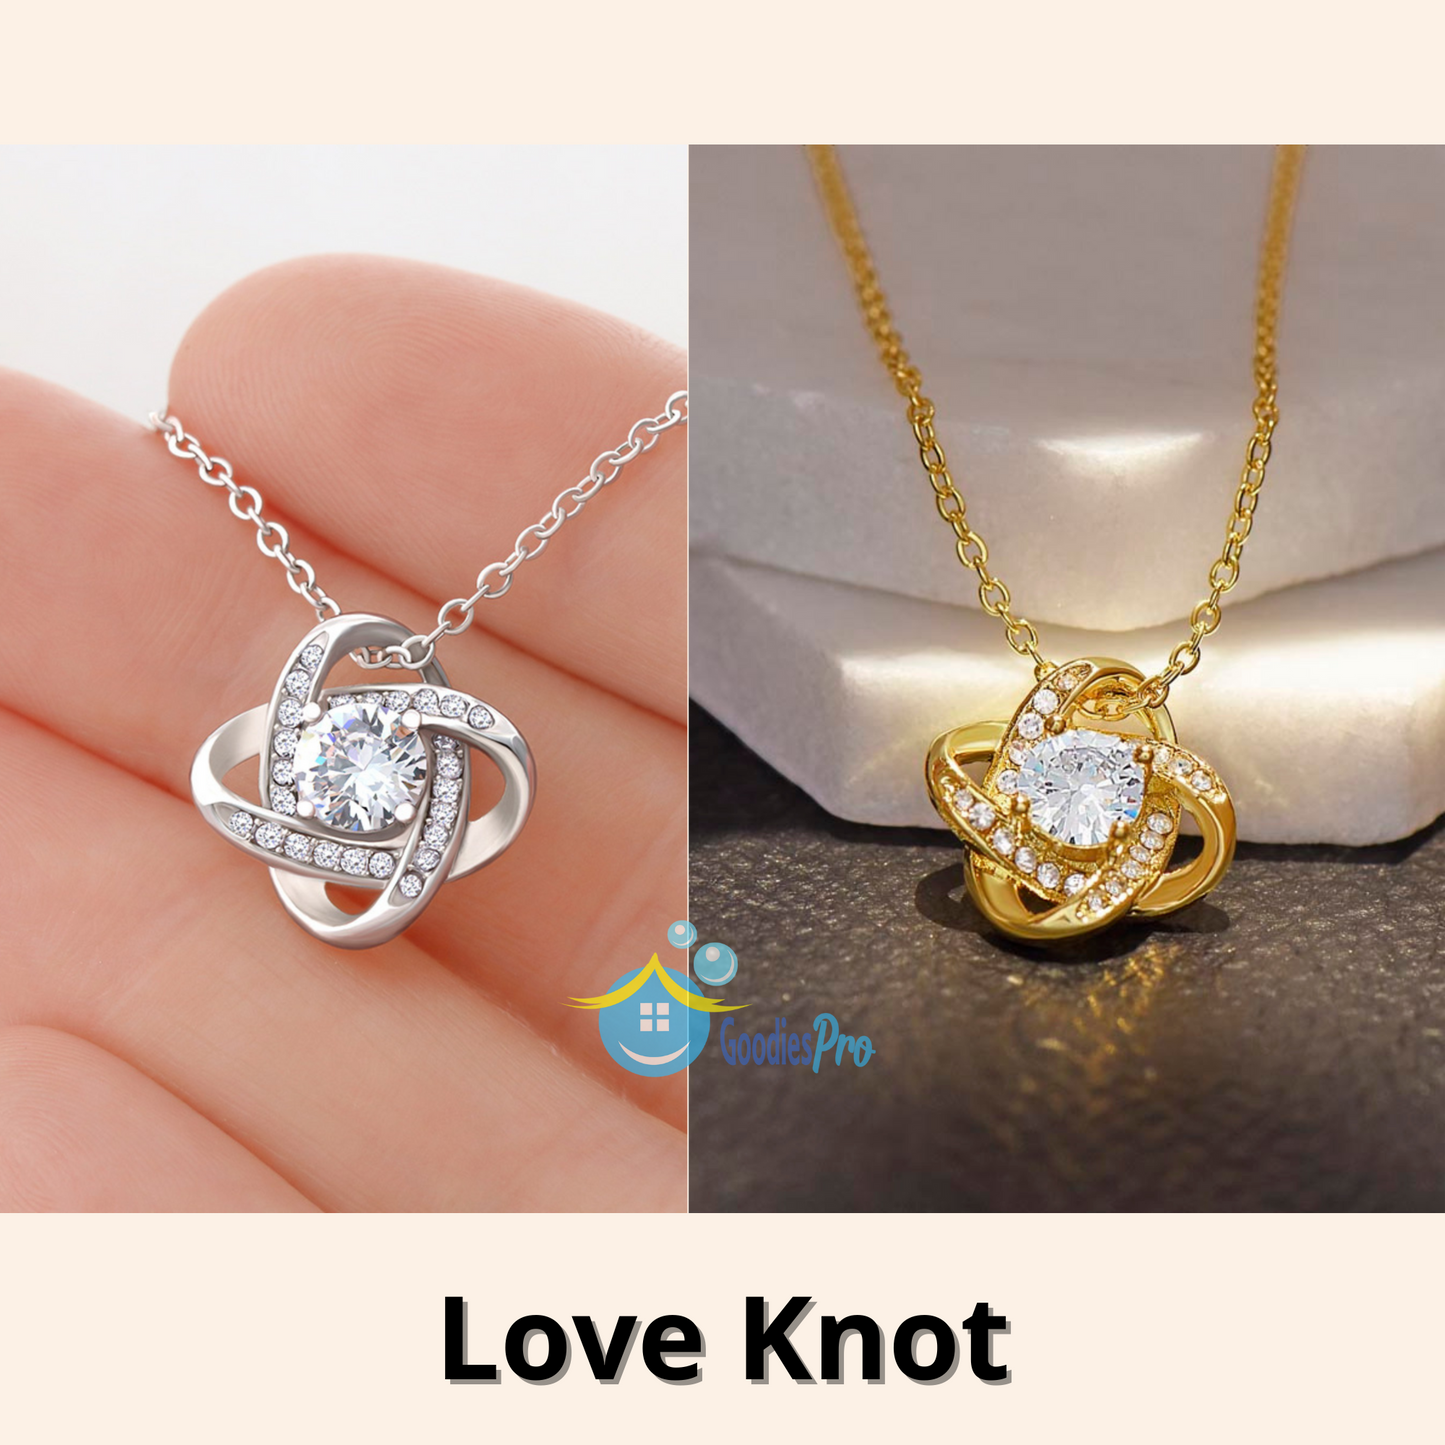 To My Daughter On Her Pregnancy Gift From Mom & Dad- A new phase - Love Knot Necklace #e46